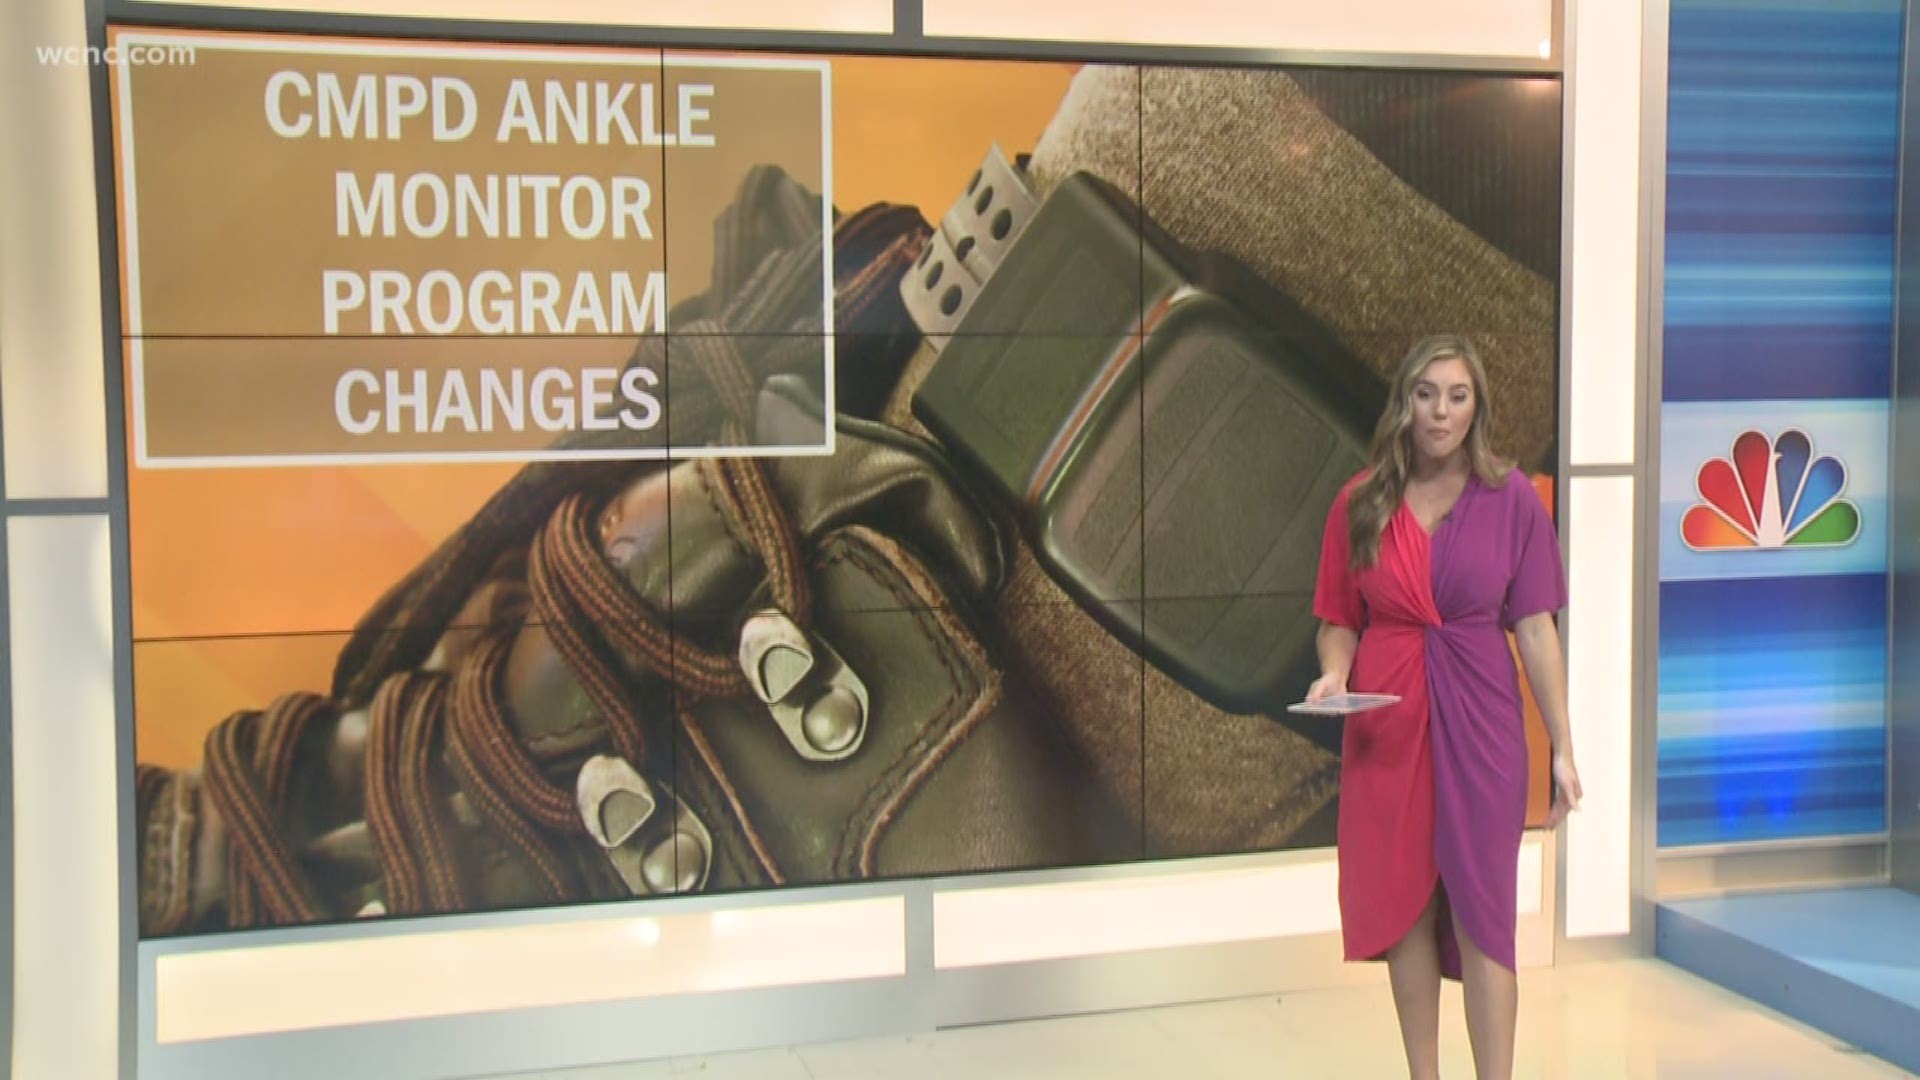 Trending in CLT: CMPD ankle monitor program changes